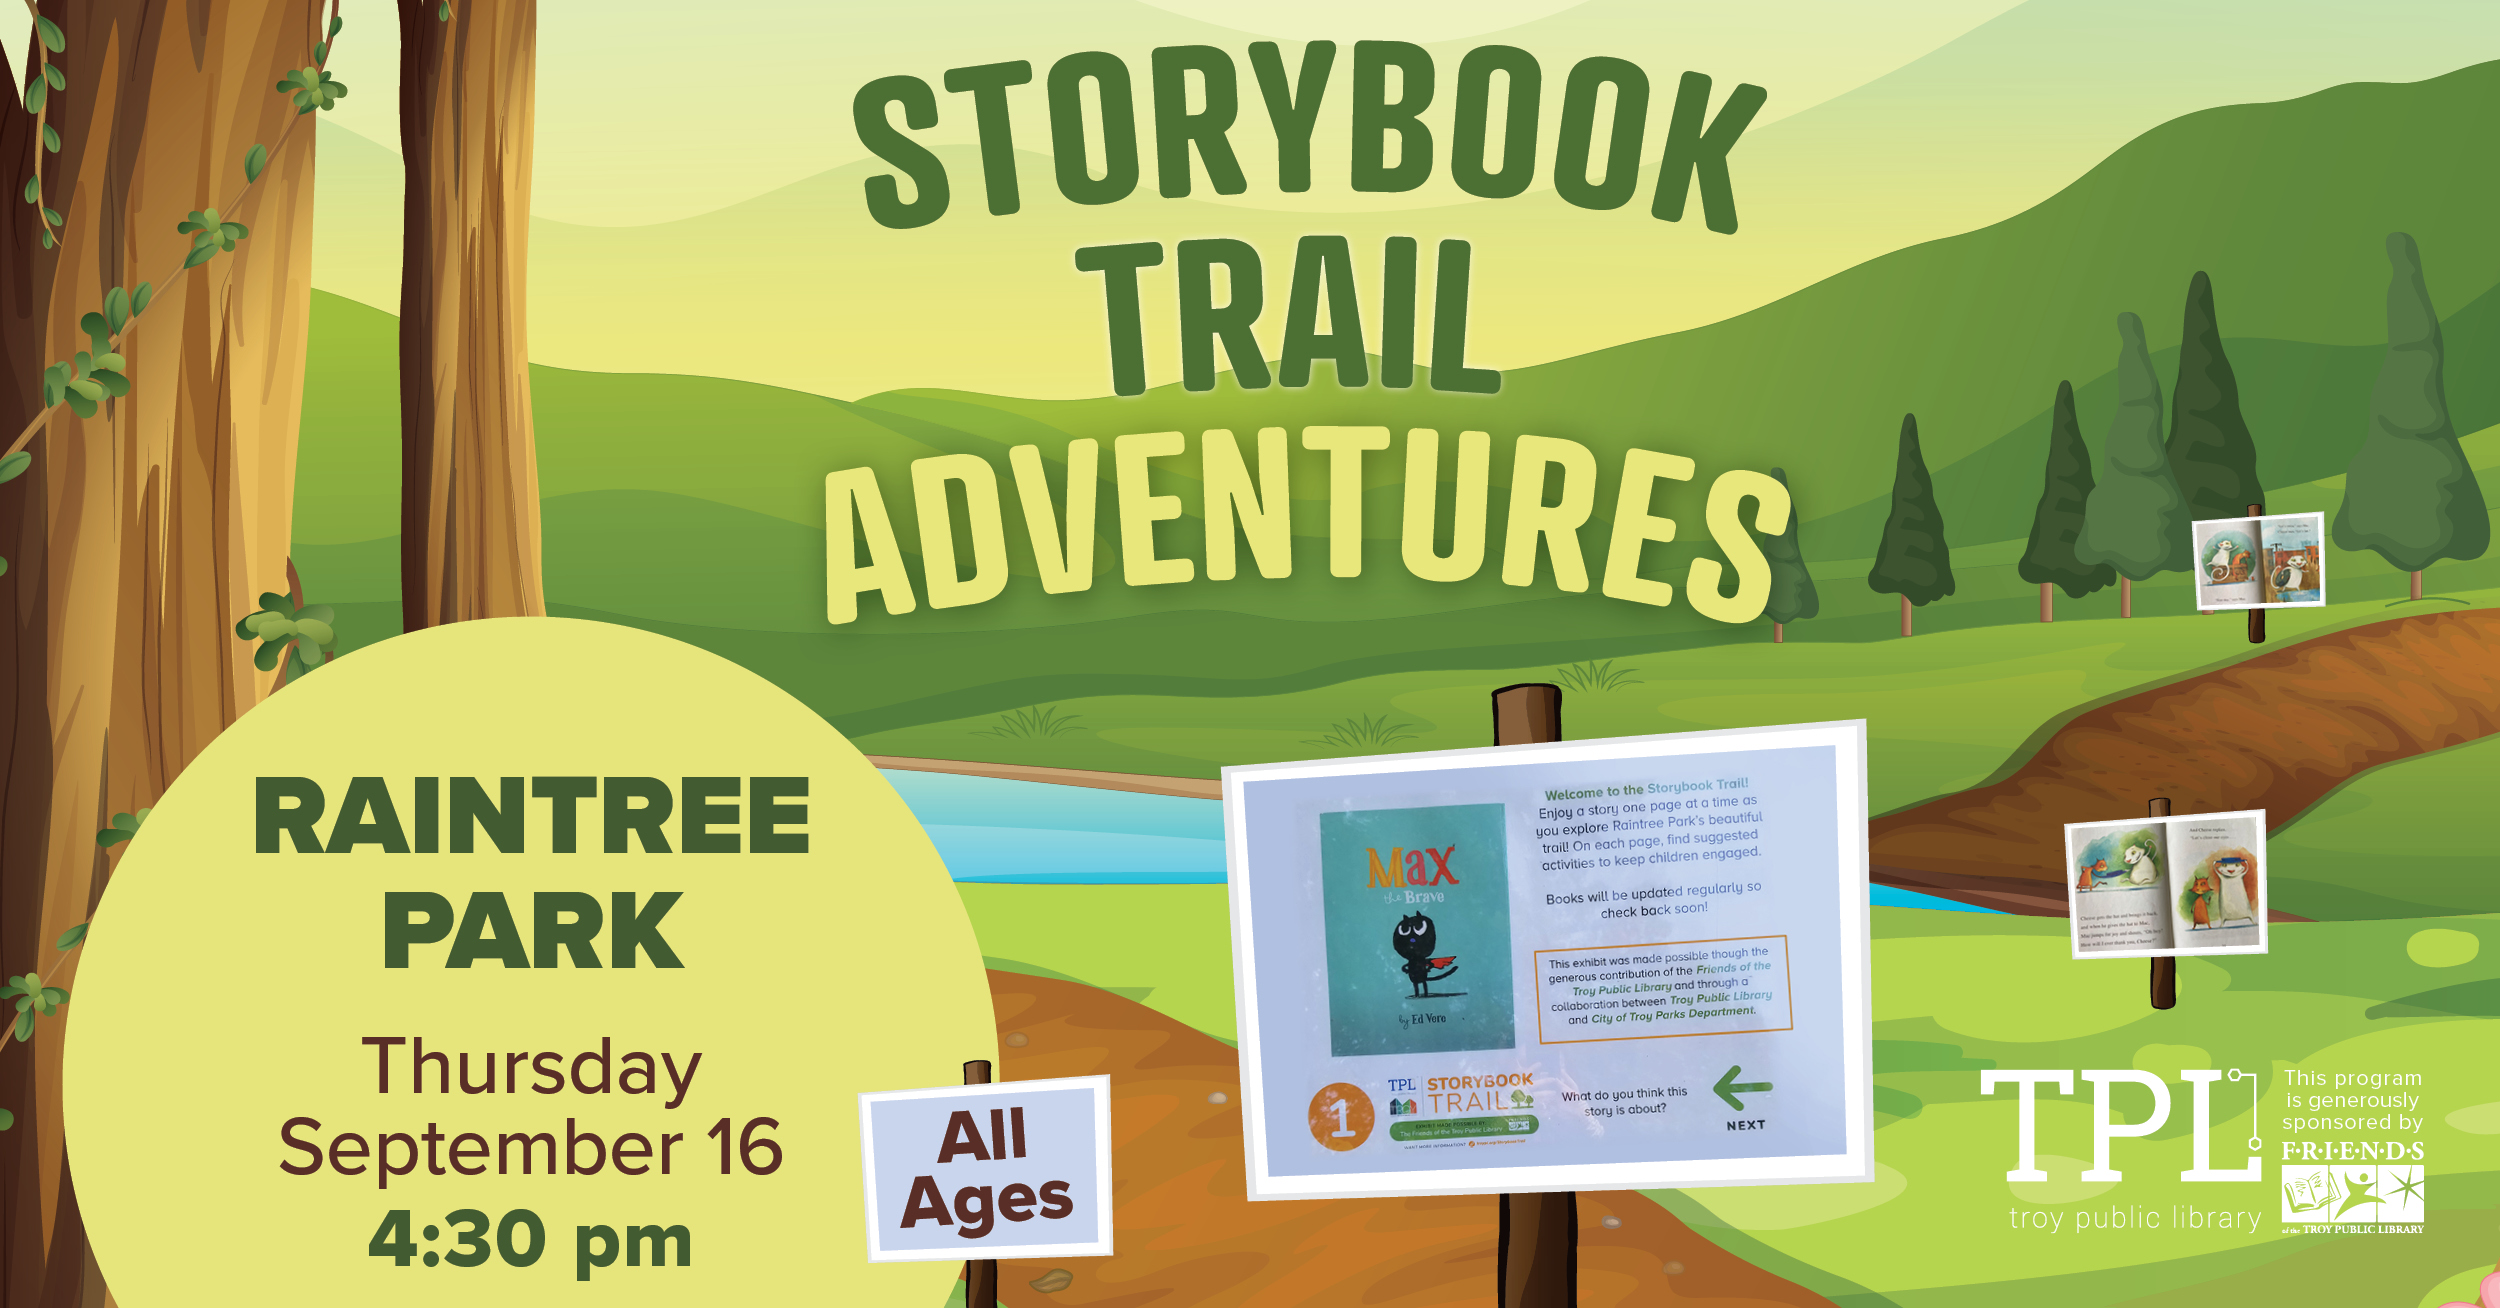 Storybook Trail Adventures. All Ages. Raintree Park Thursday, September 16 at 4:30pm. Sponsored by the Friends of the Troy Public Library